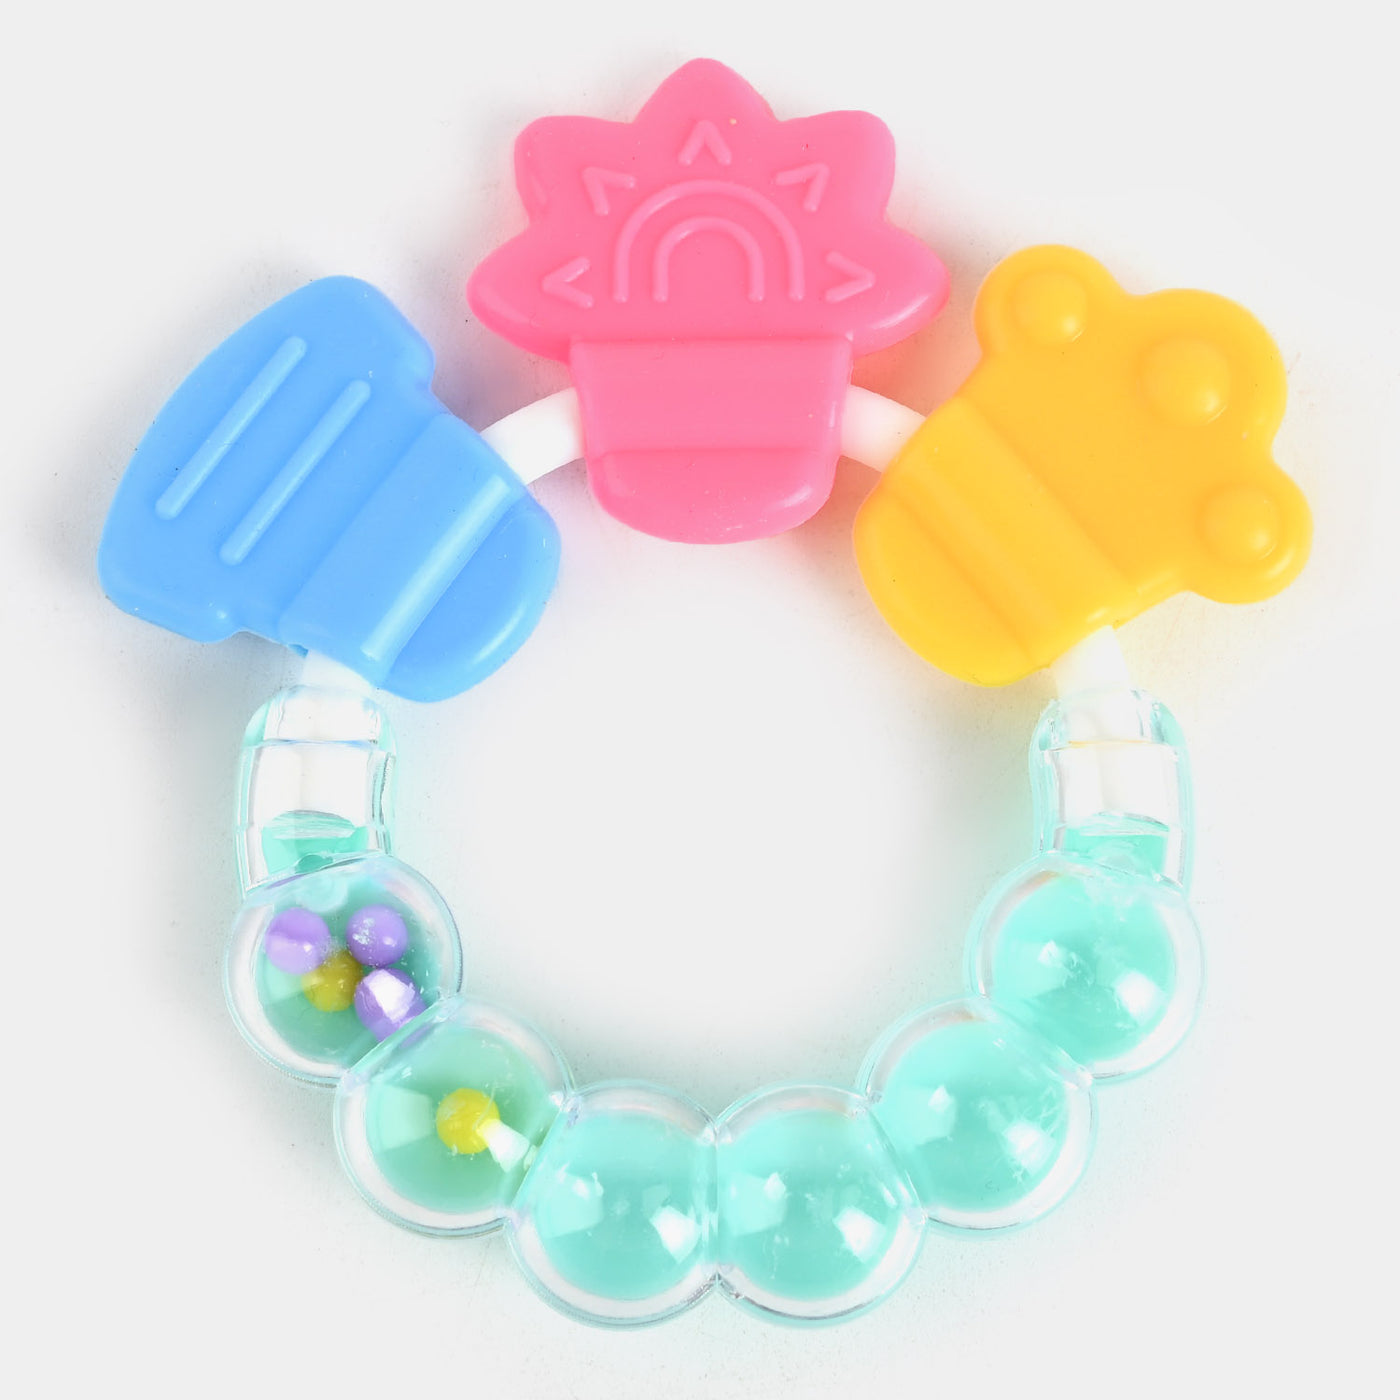 Rattle & Silicon Teether